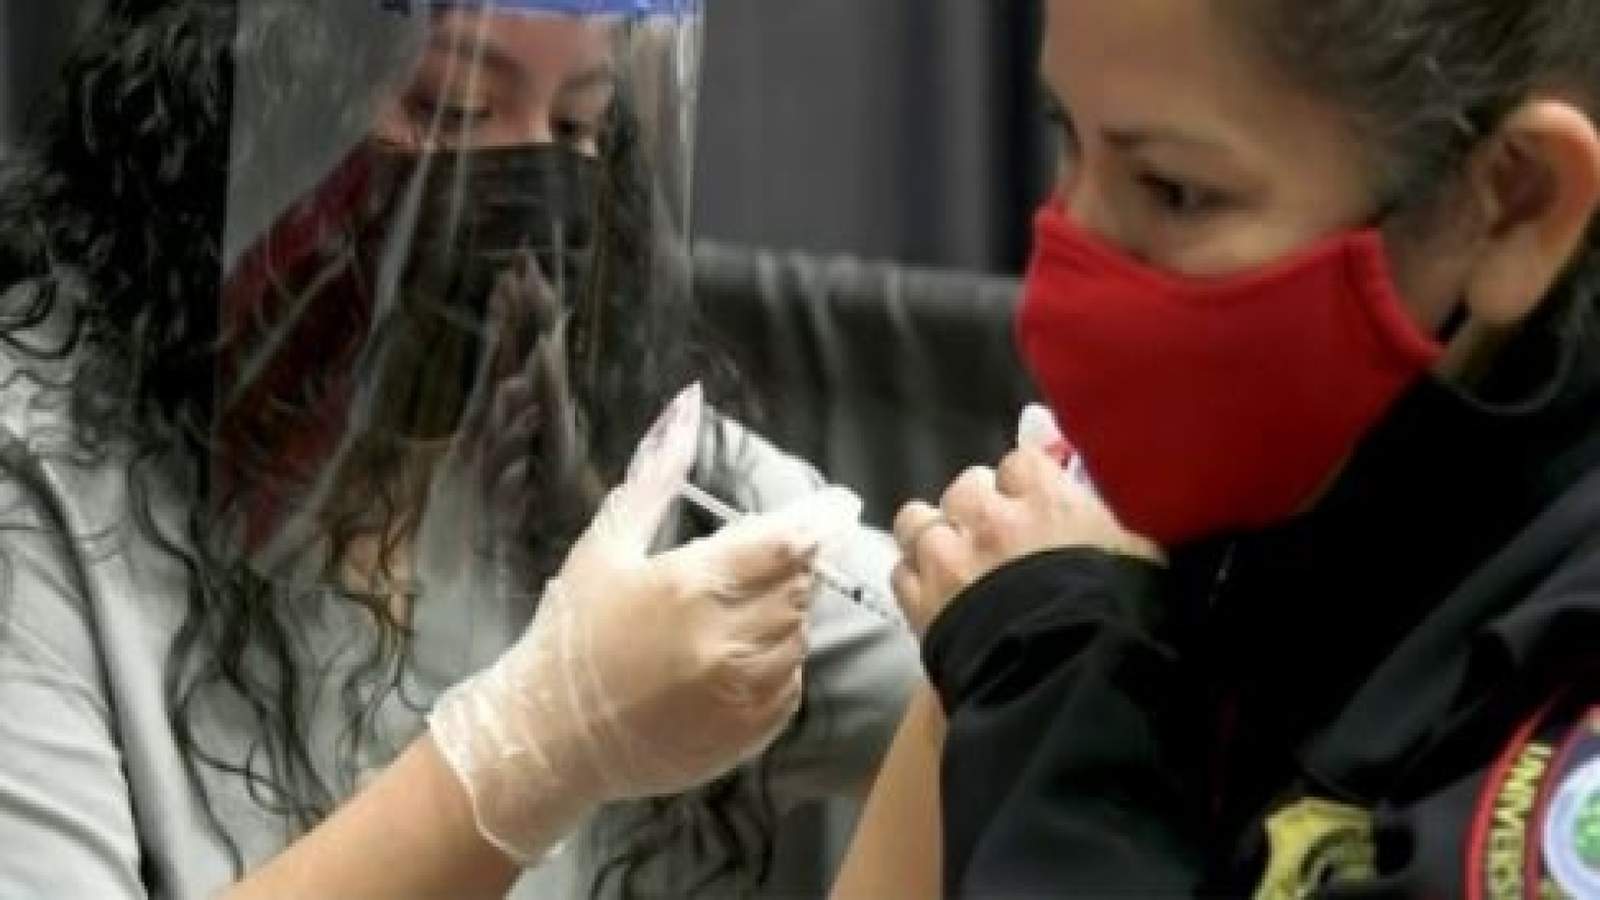 University of Houston begins vaccinating students, faculty in Phase 1A